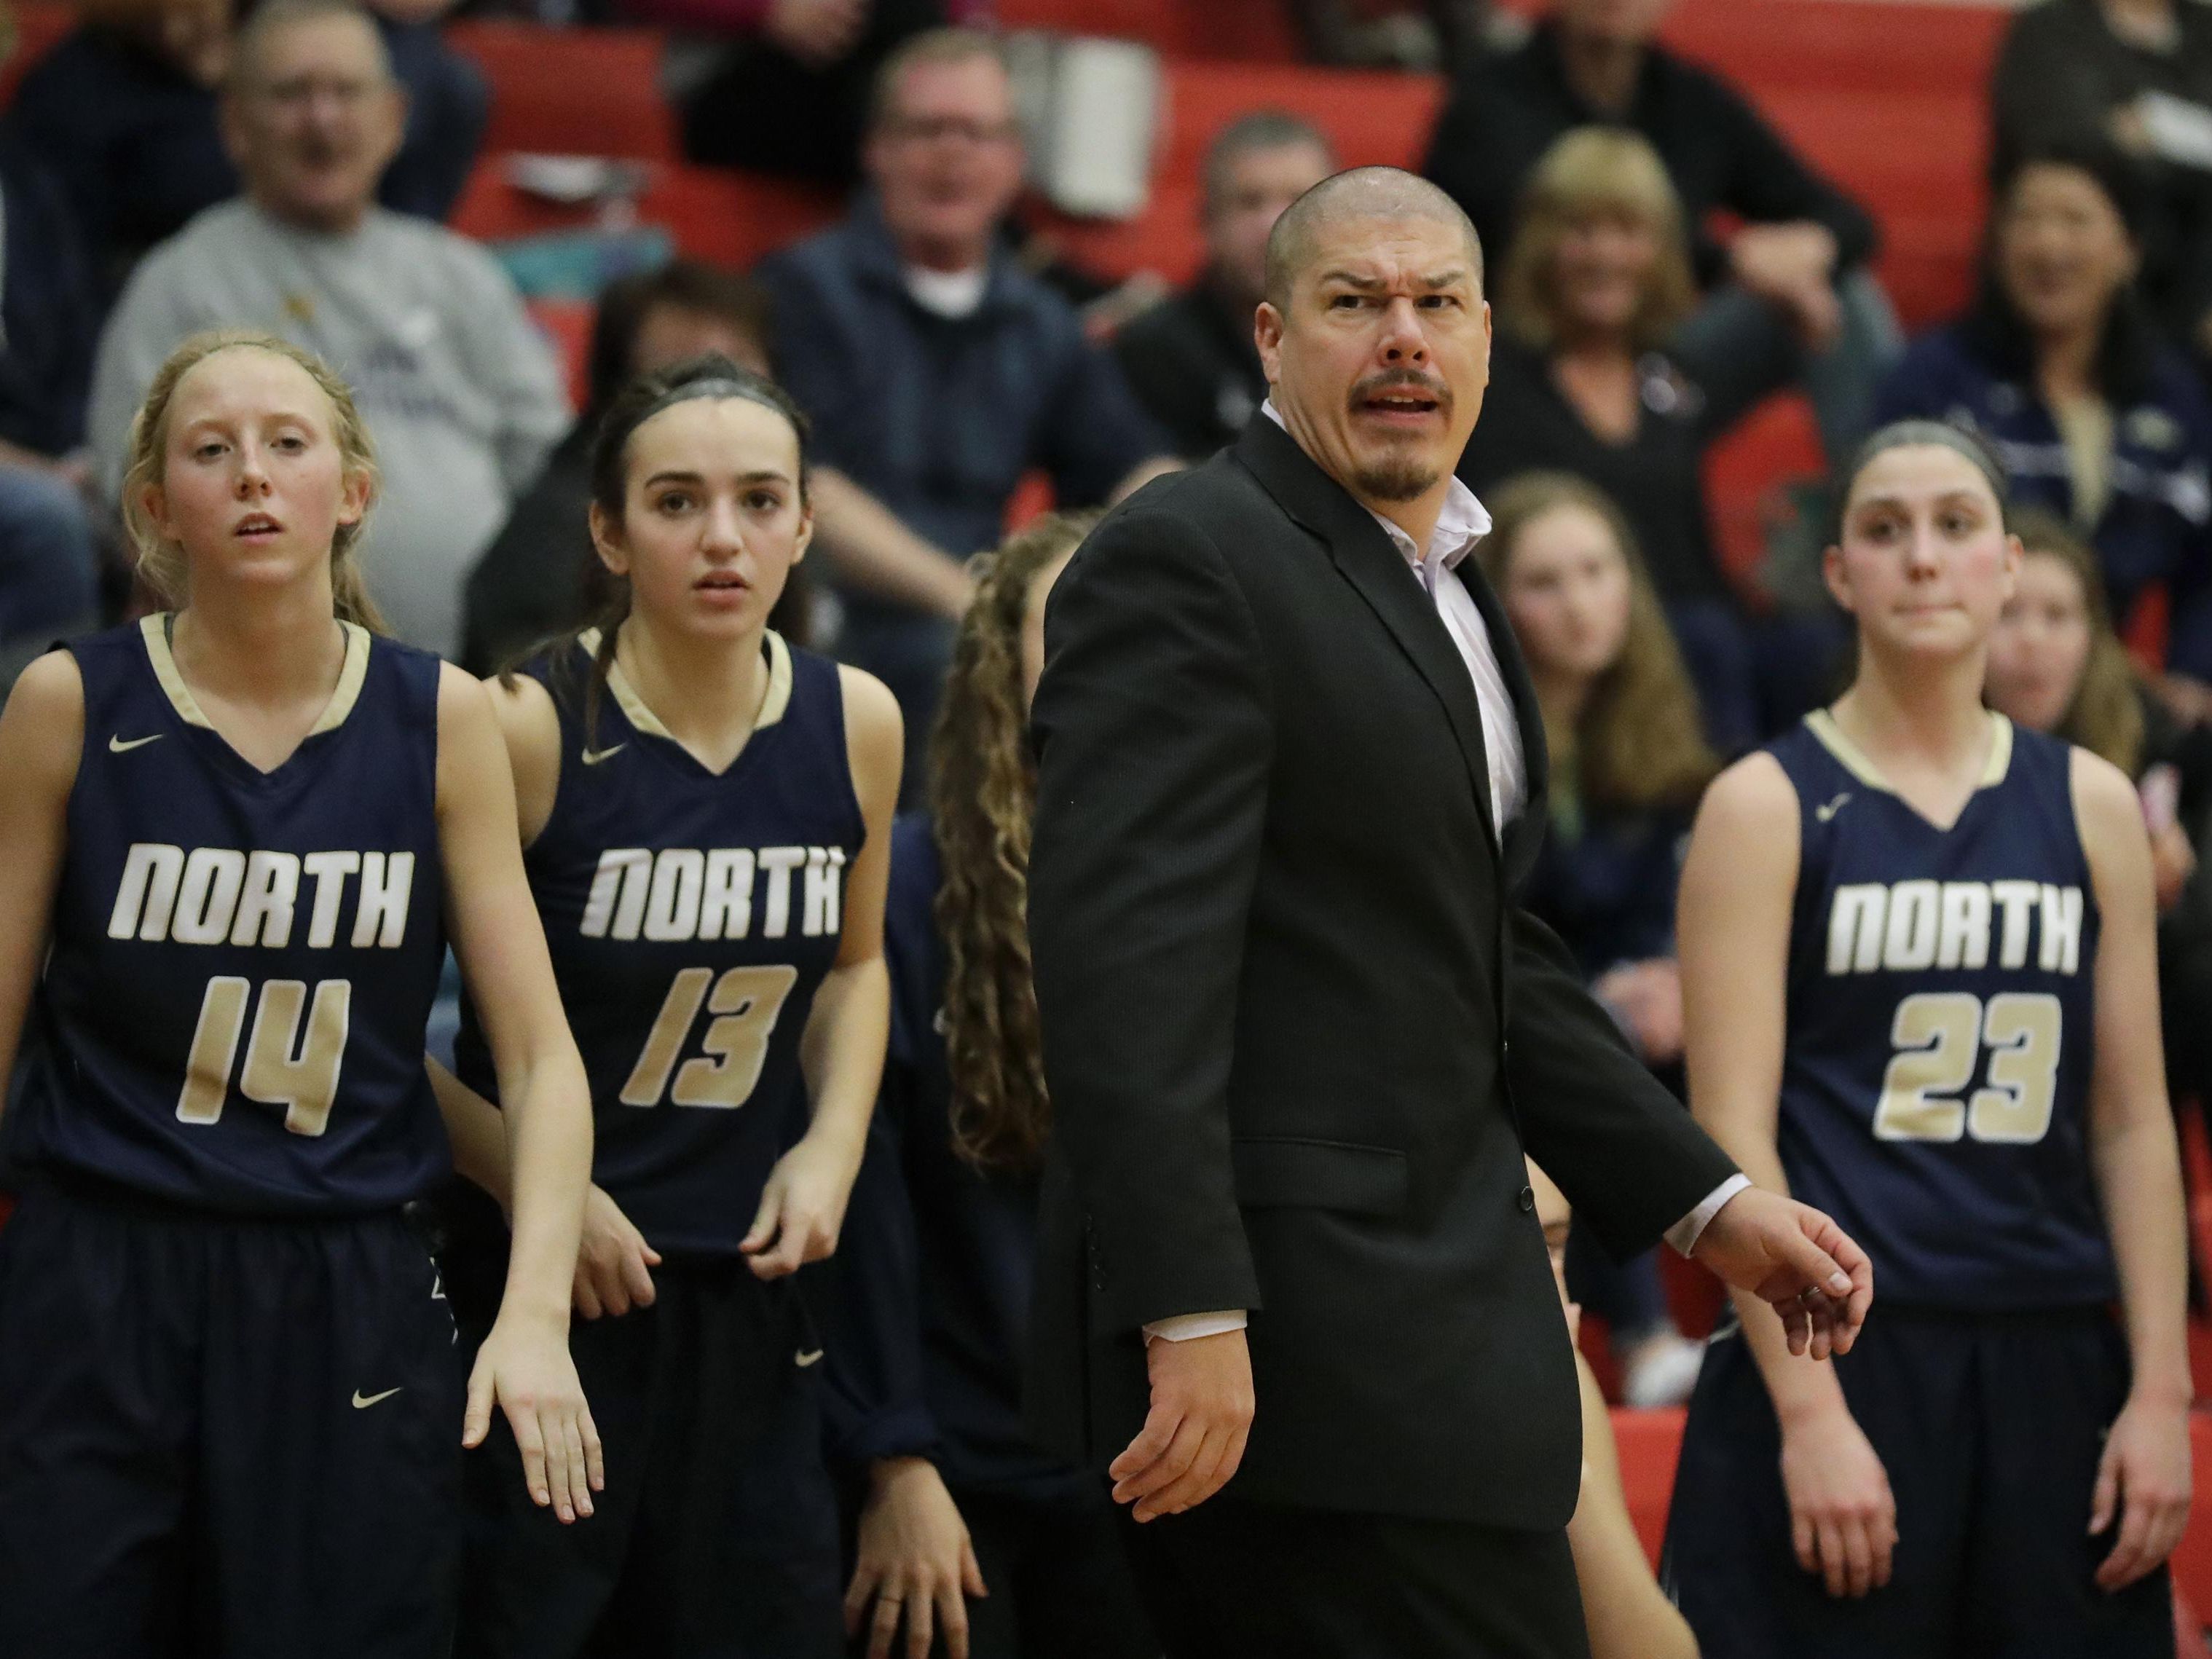 Appleton North coach Joe Russom has the top-ranked girls’ basketball team in the state in Division 1.